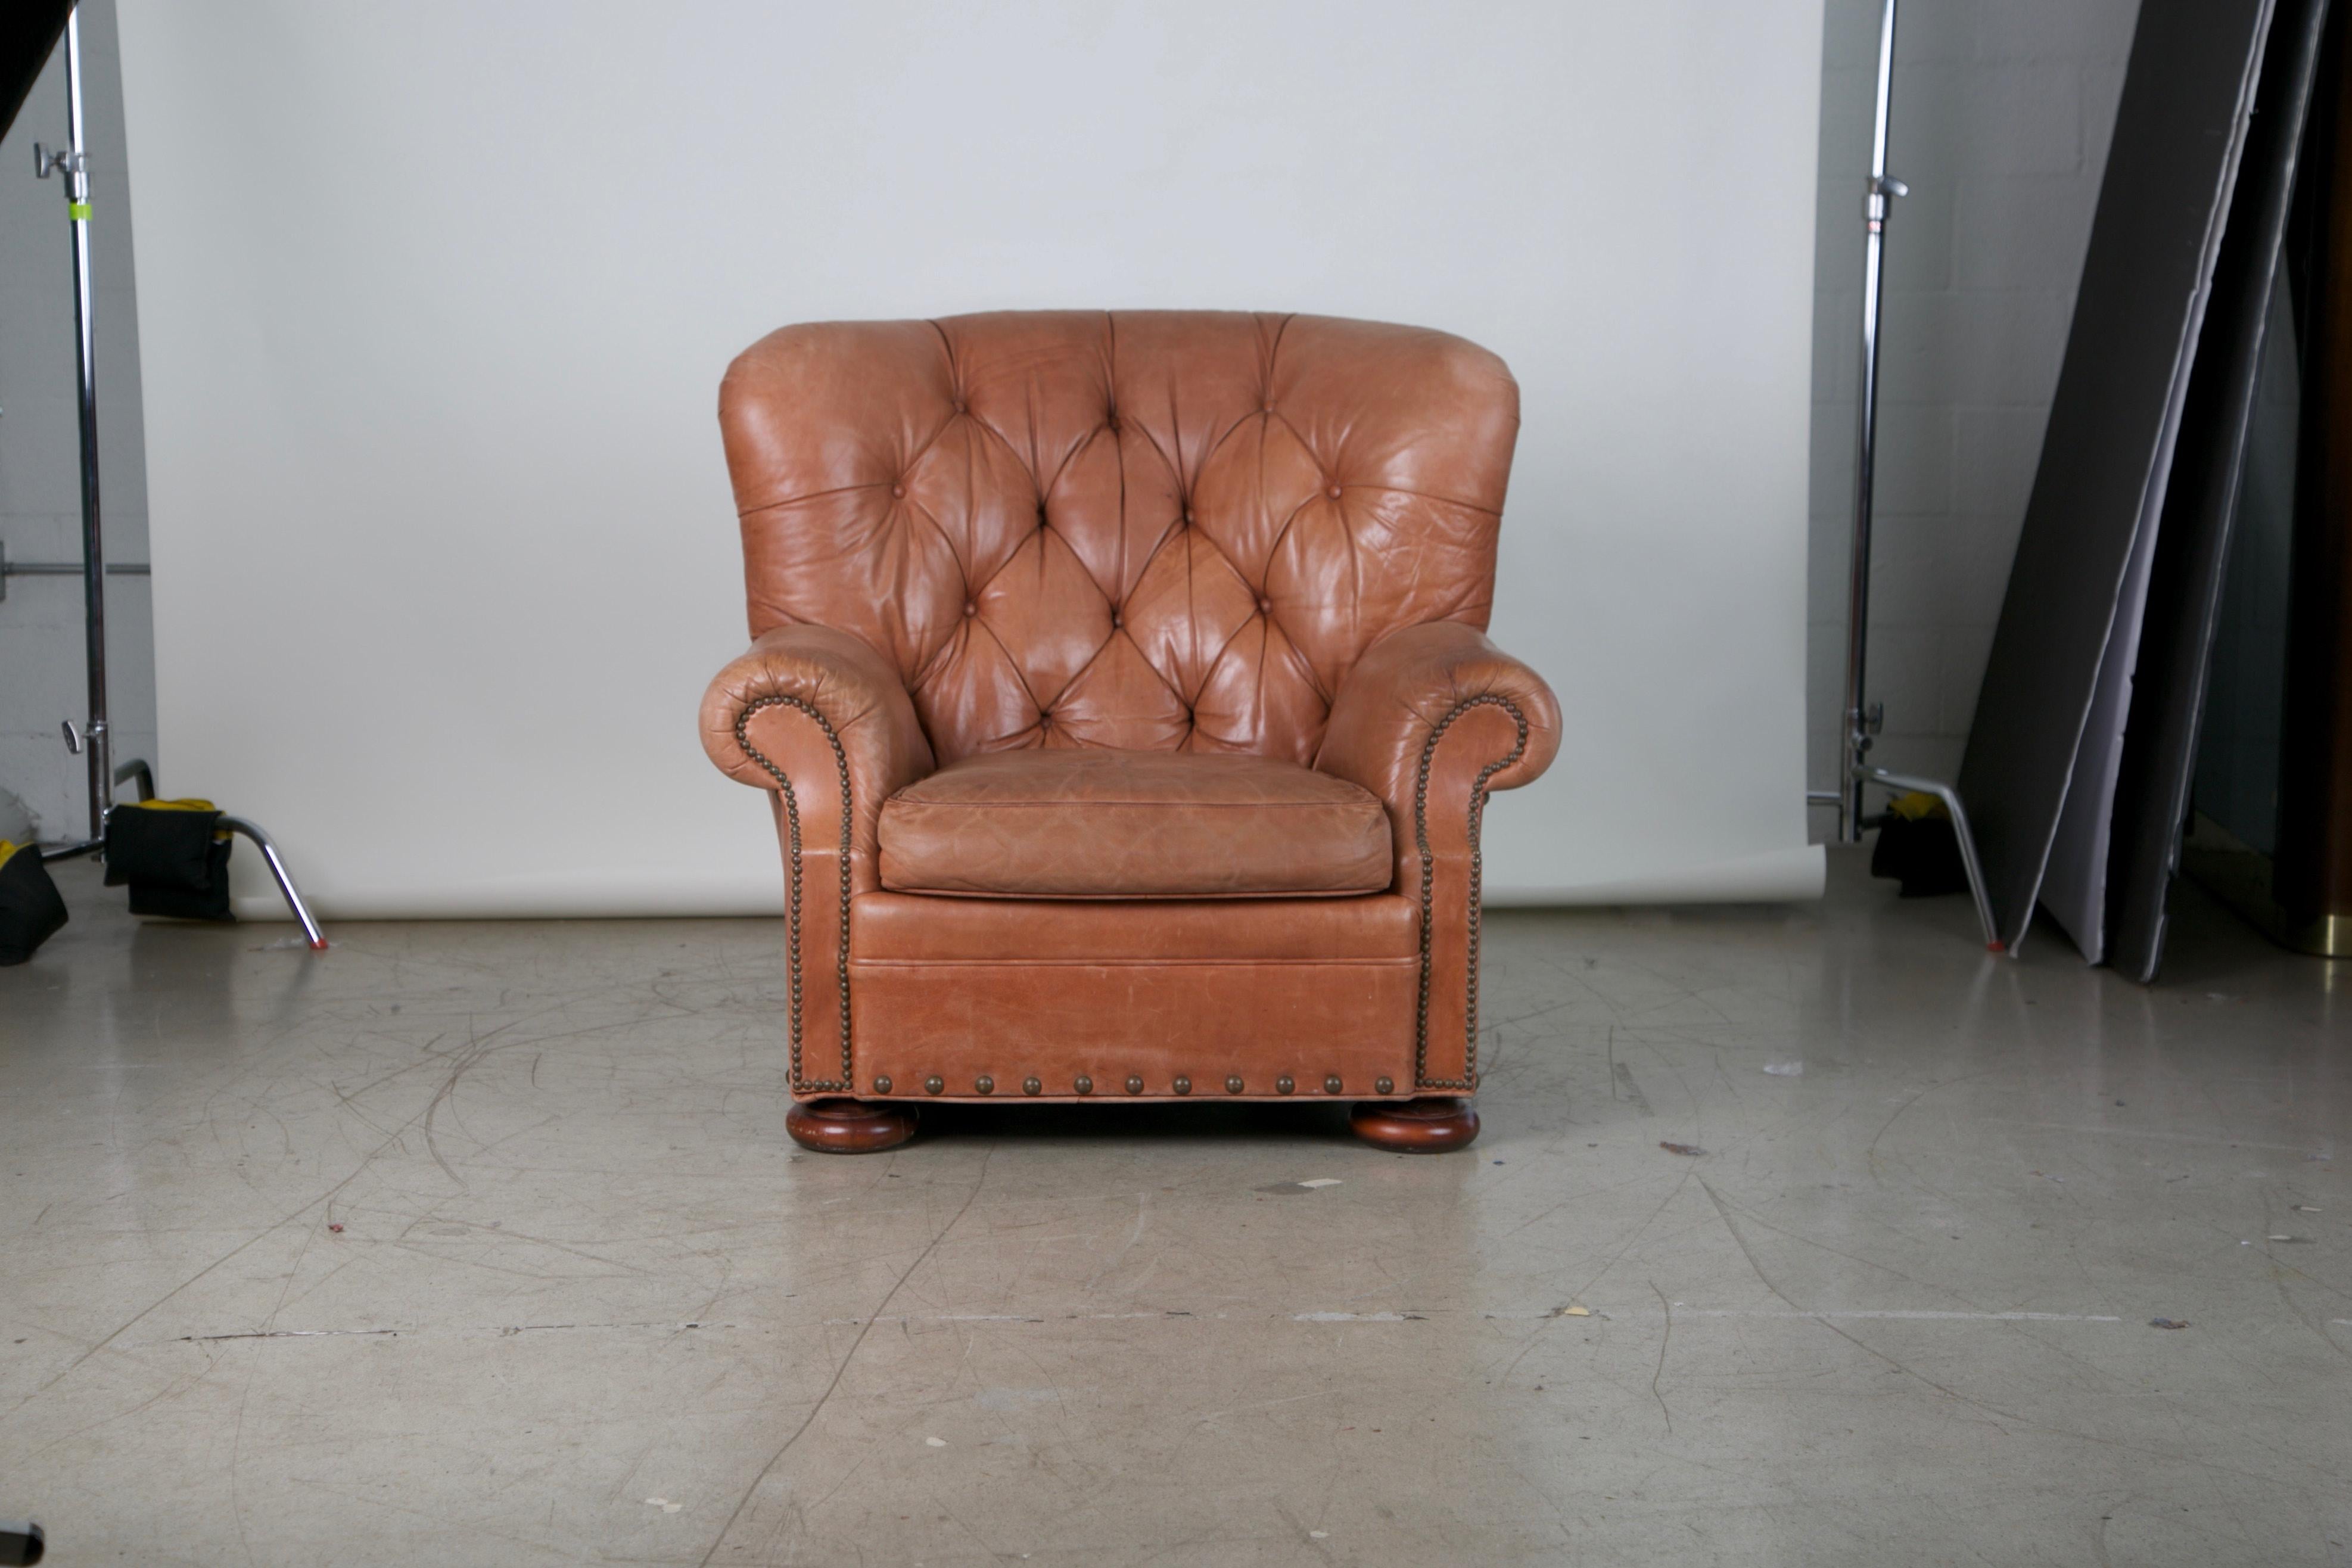 Handsome pair of lounge chairs in the style of Ralph Lauren. This set would inject some traditional elegance to any interior, featuring rolled arms, tufting, and sizable bronze nailheads. The duo exhibits the original tan leather upholstery that has